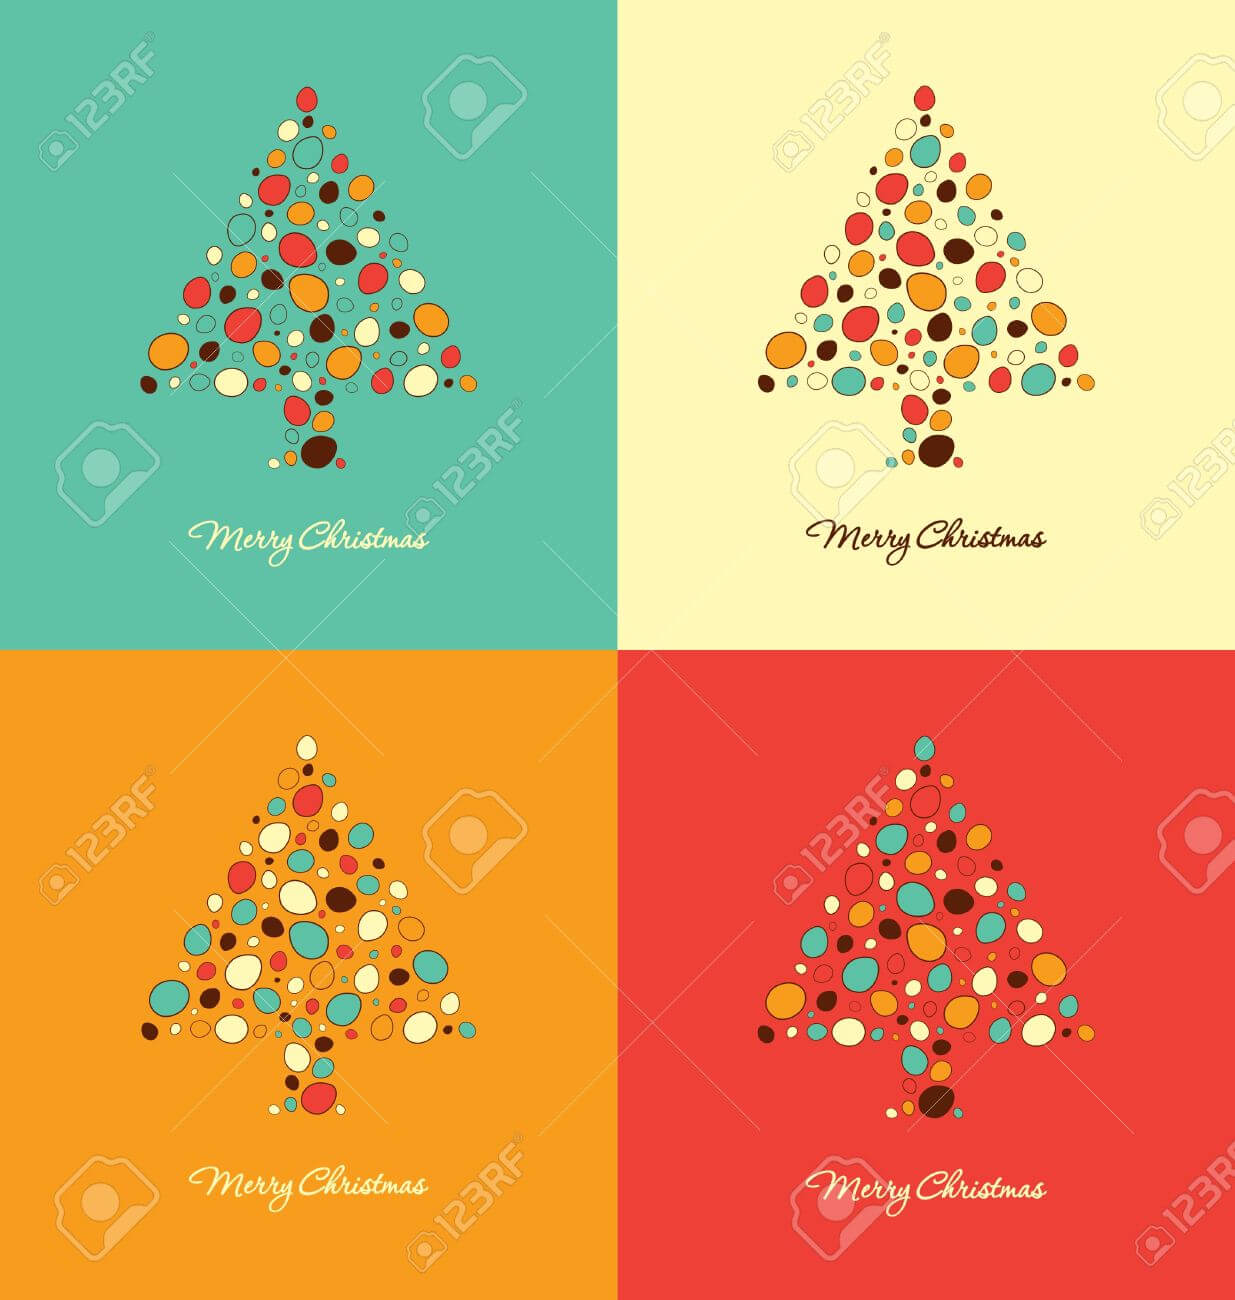 Sumptuous Design Ideas Christmas Card Designs Most Free In Adobe Illustrator Christmas Card Template